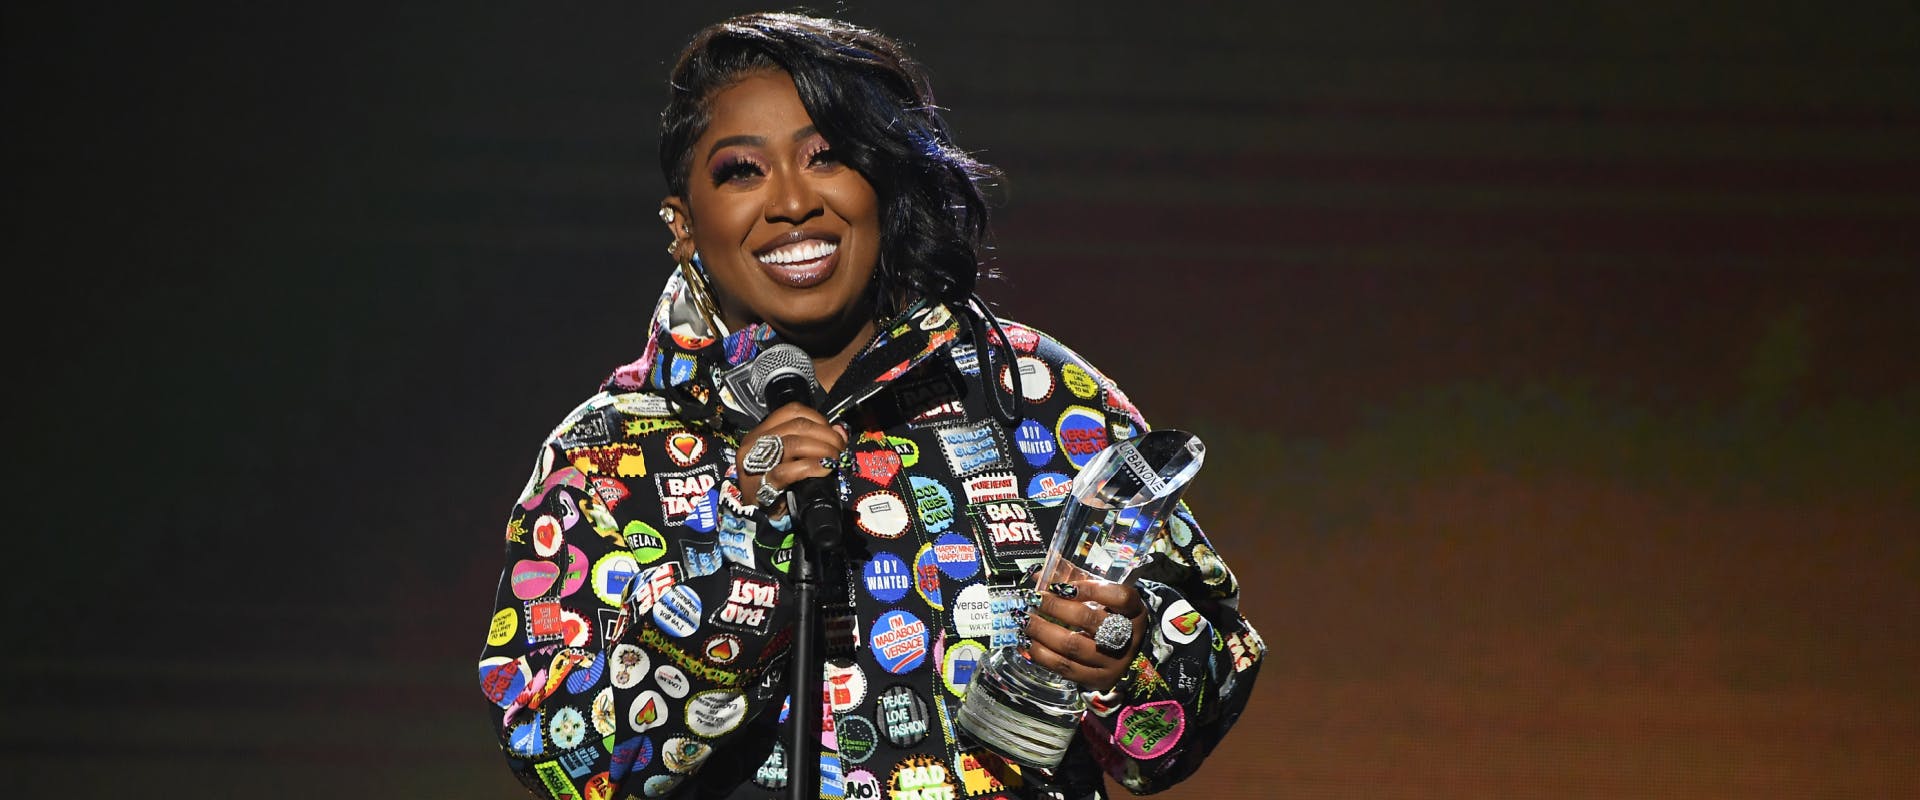 OXON HILL, MARYLAND - DECEMBER 05: Missy Elliott speaks onstage during 2019 Urban One Honors at MGM National Harbor on December 05, 2019 in Oxon Hill, Maryland. (Photo by Paras Griffin/Getty Images)